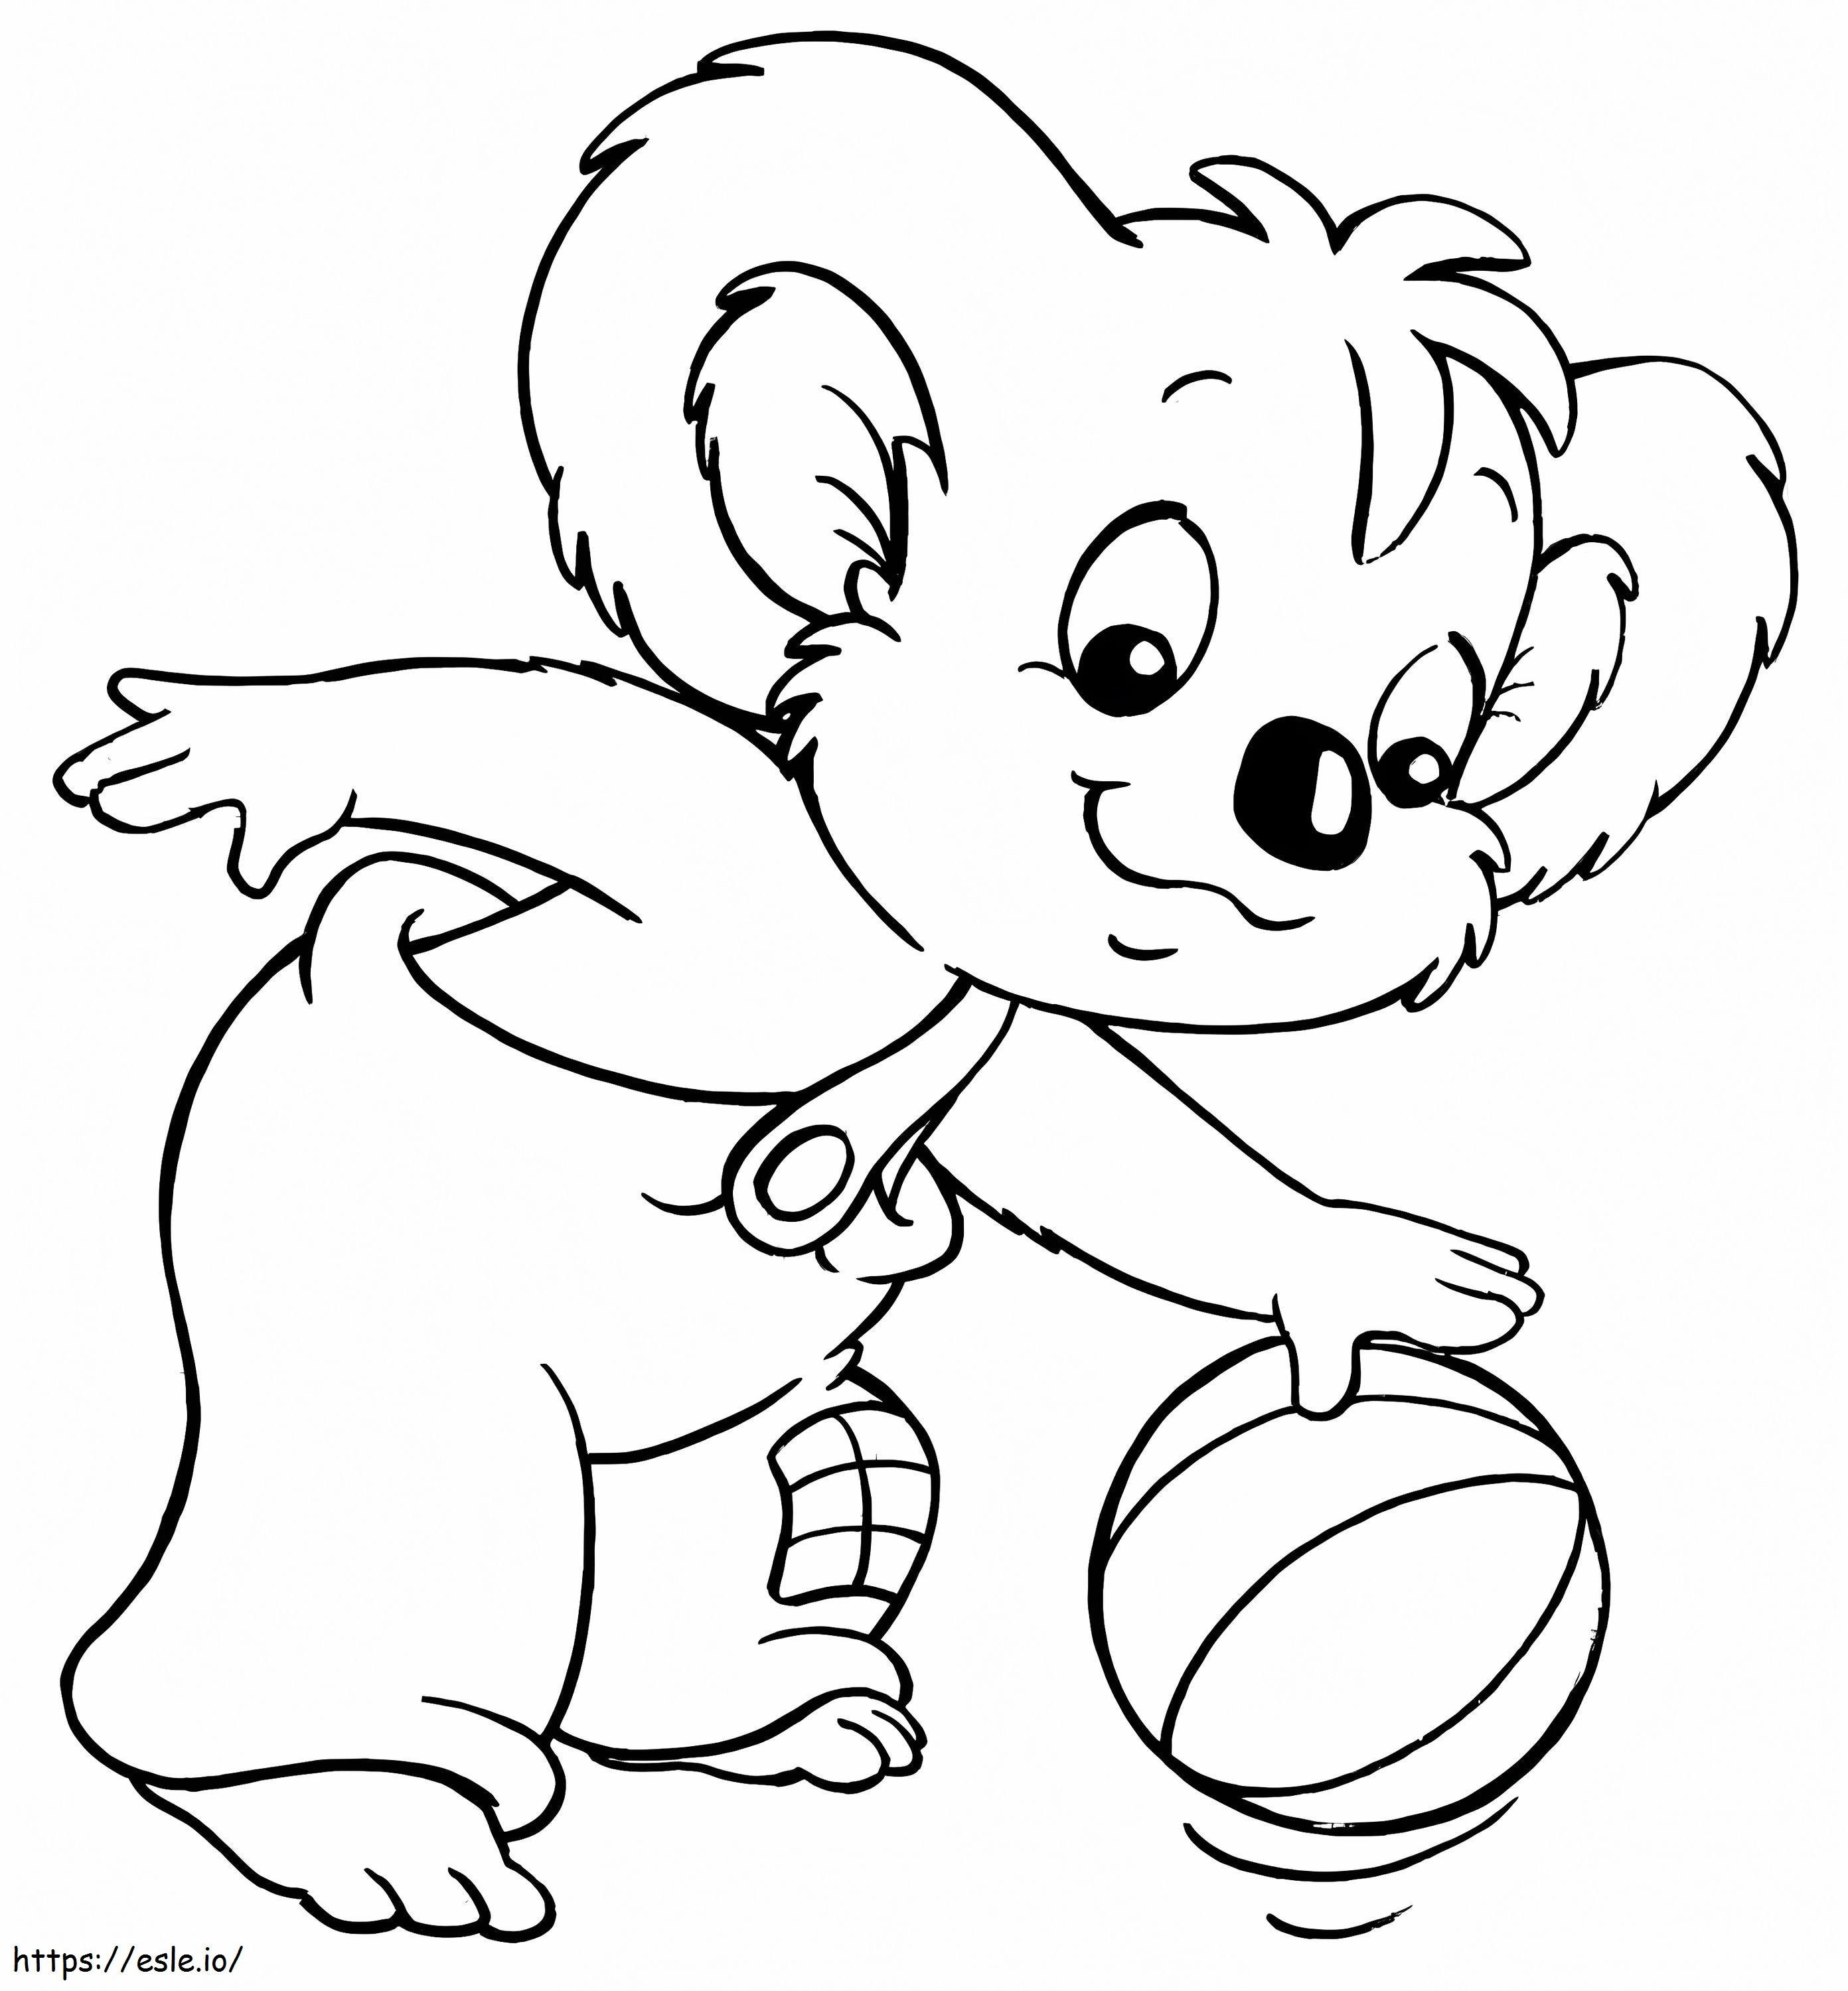 Blinky Bill Playing Basketball coloring page